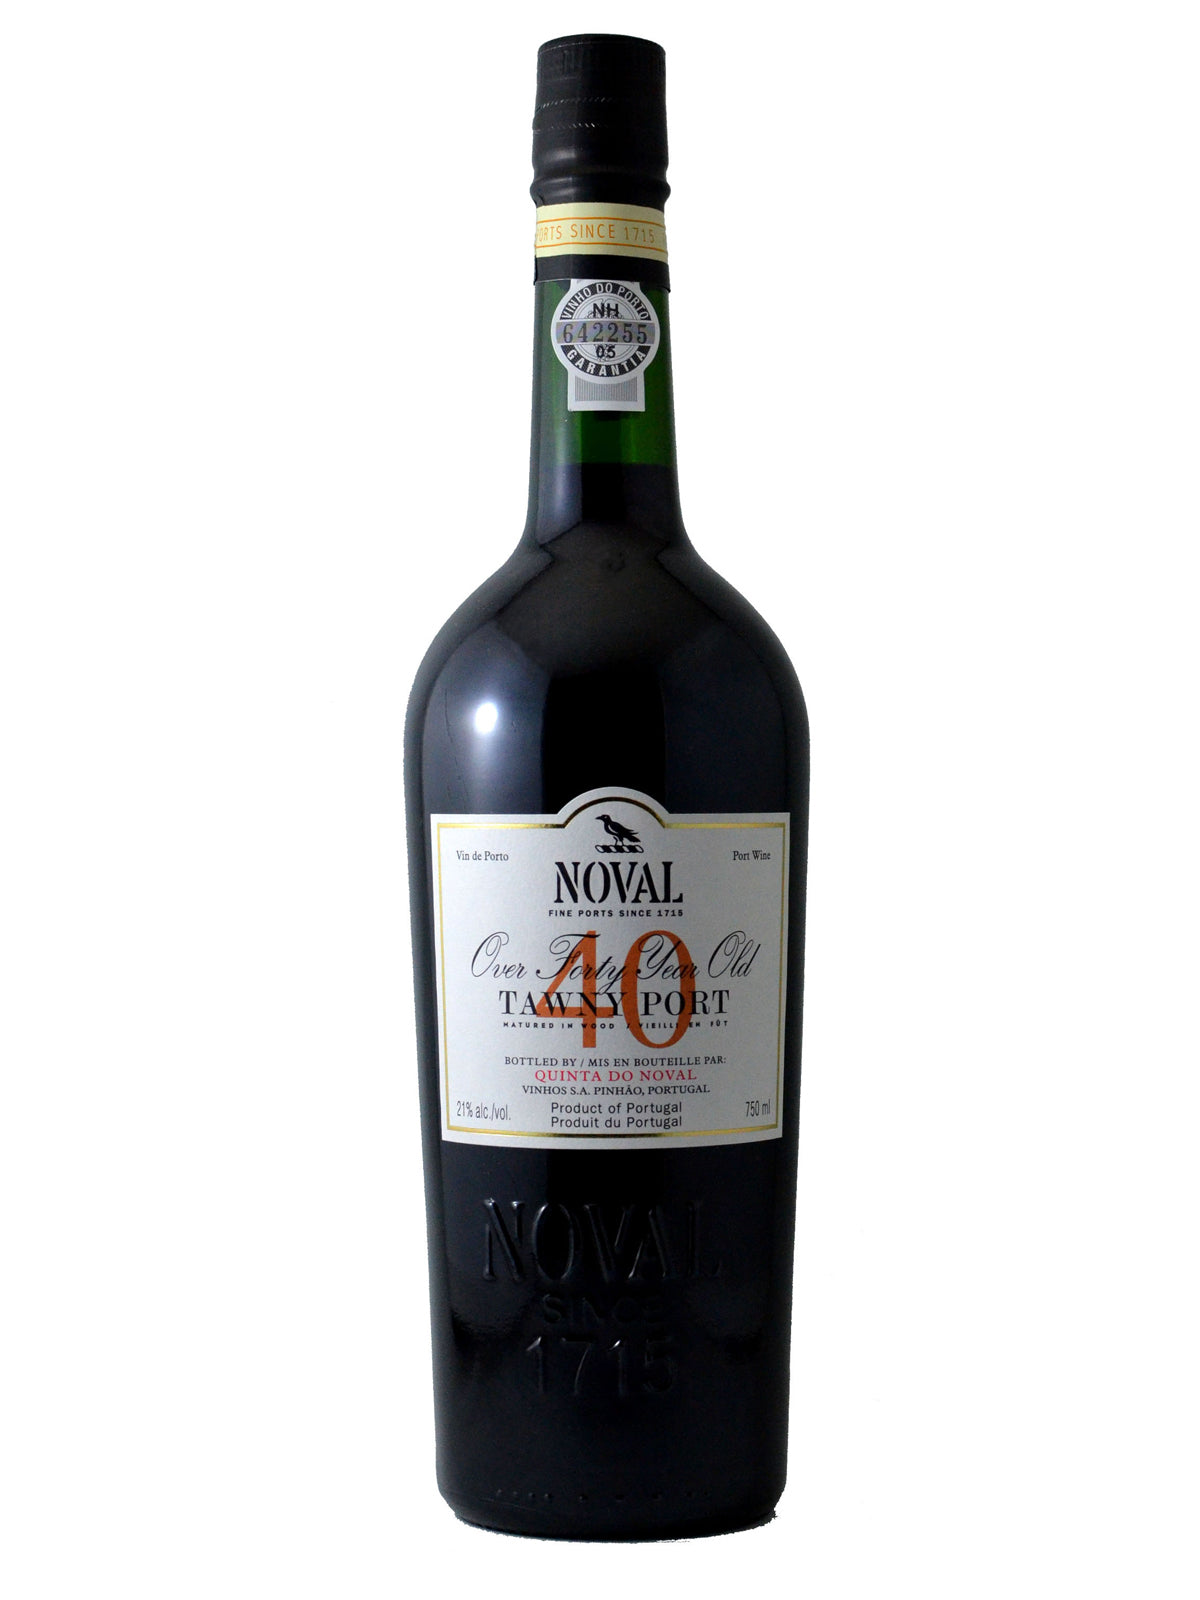 Noval, Over 40 Year Old Tawny Port